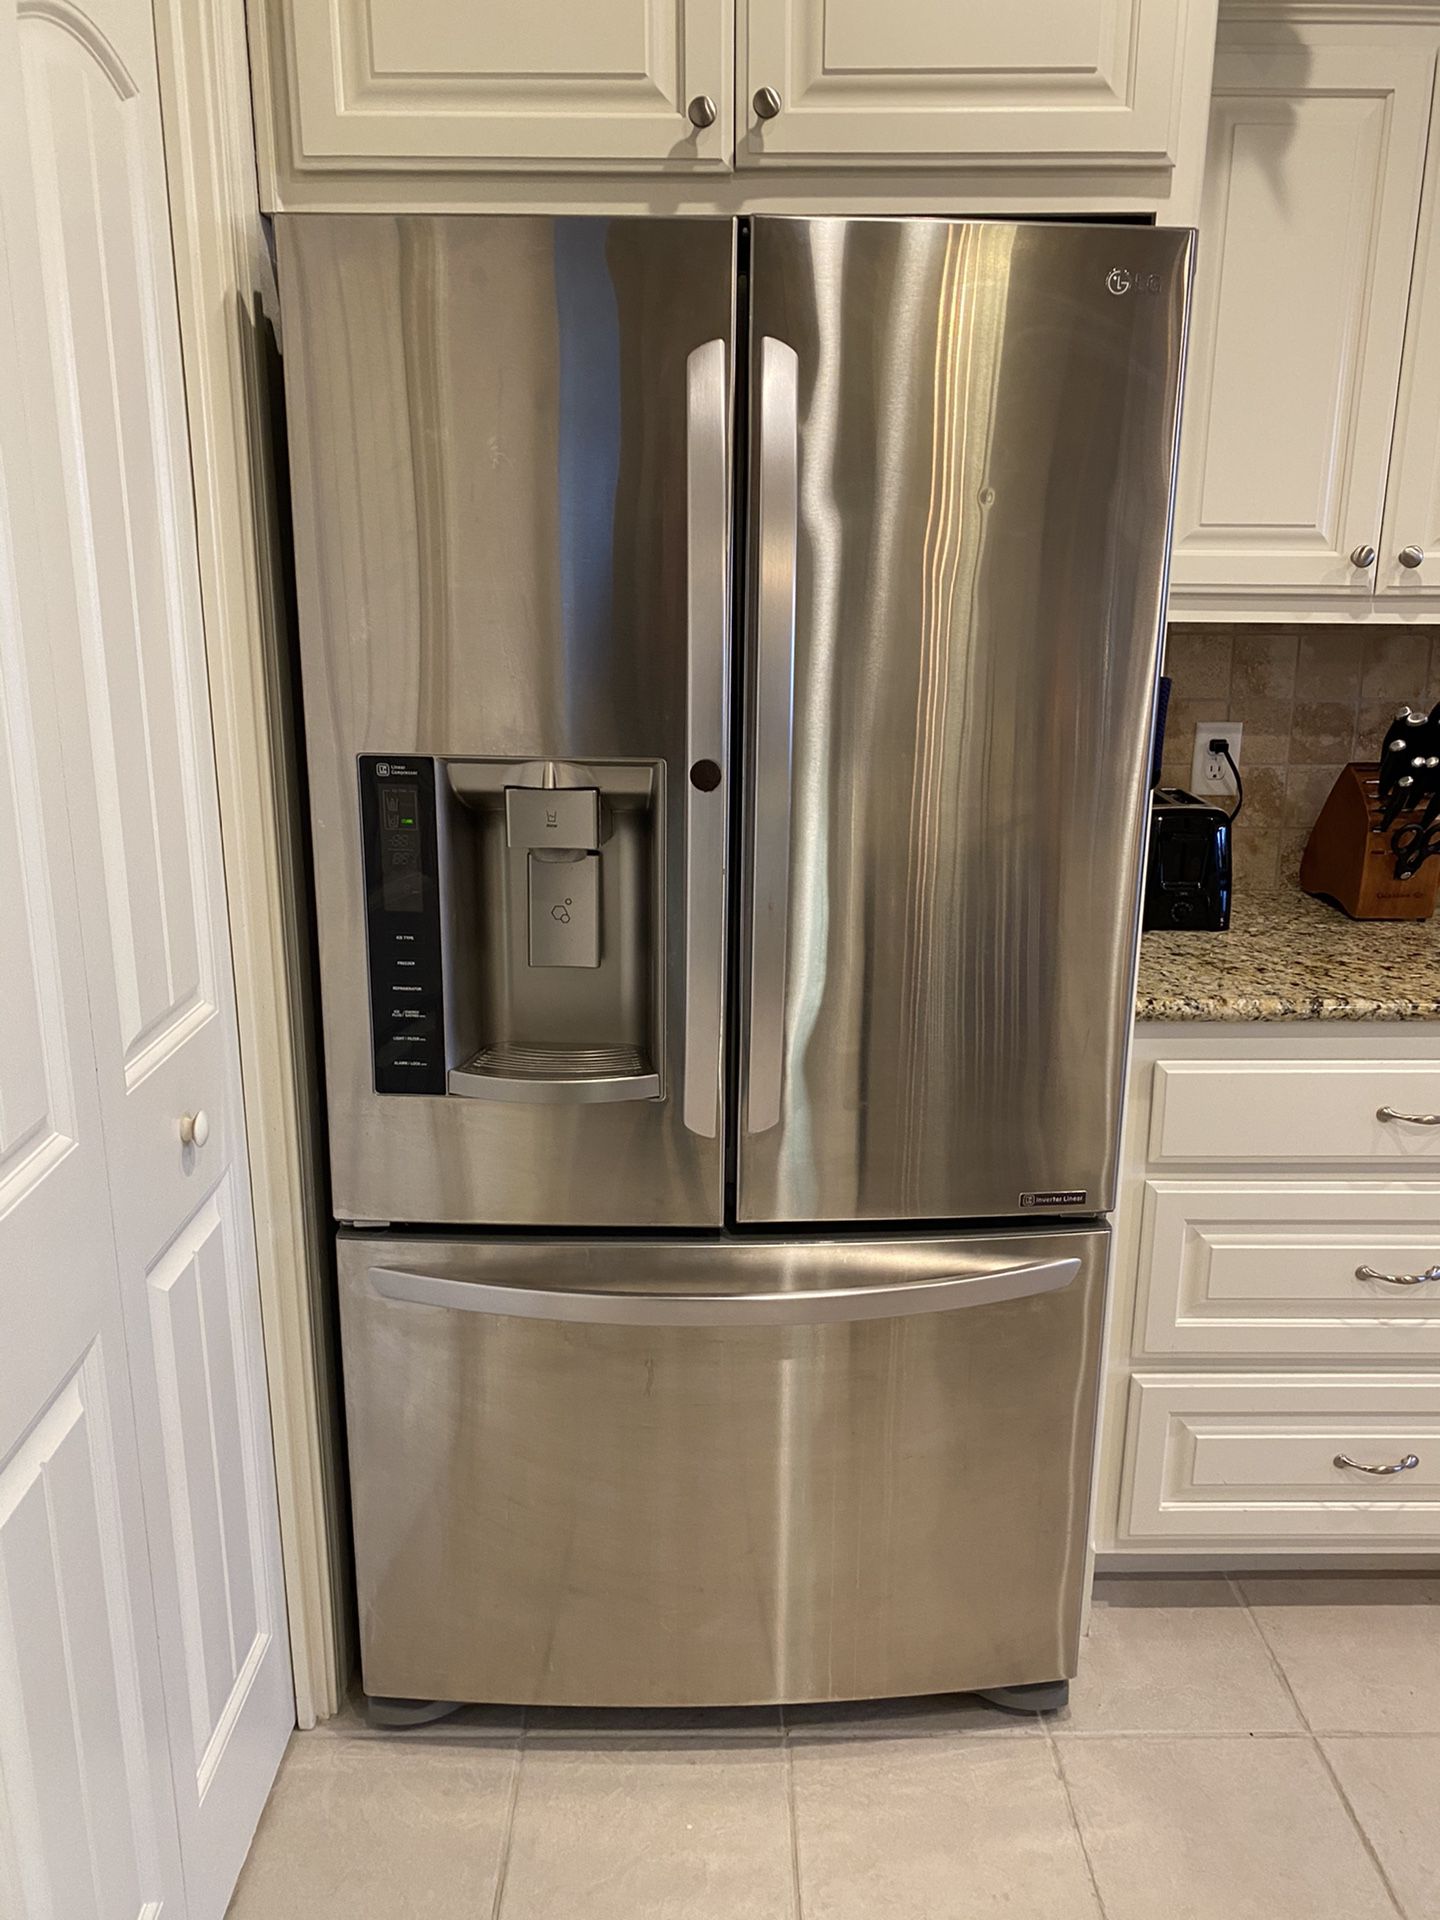 LG French Door Refrigerator w Ice Maker & Chilled Water Dispenser